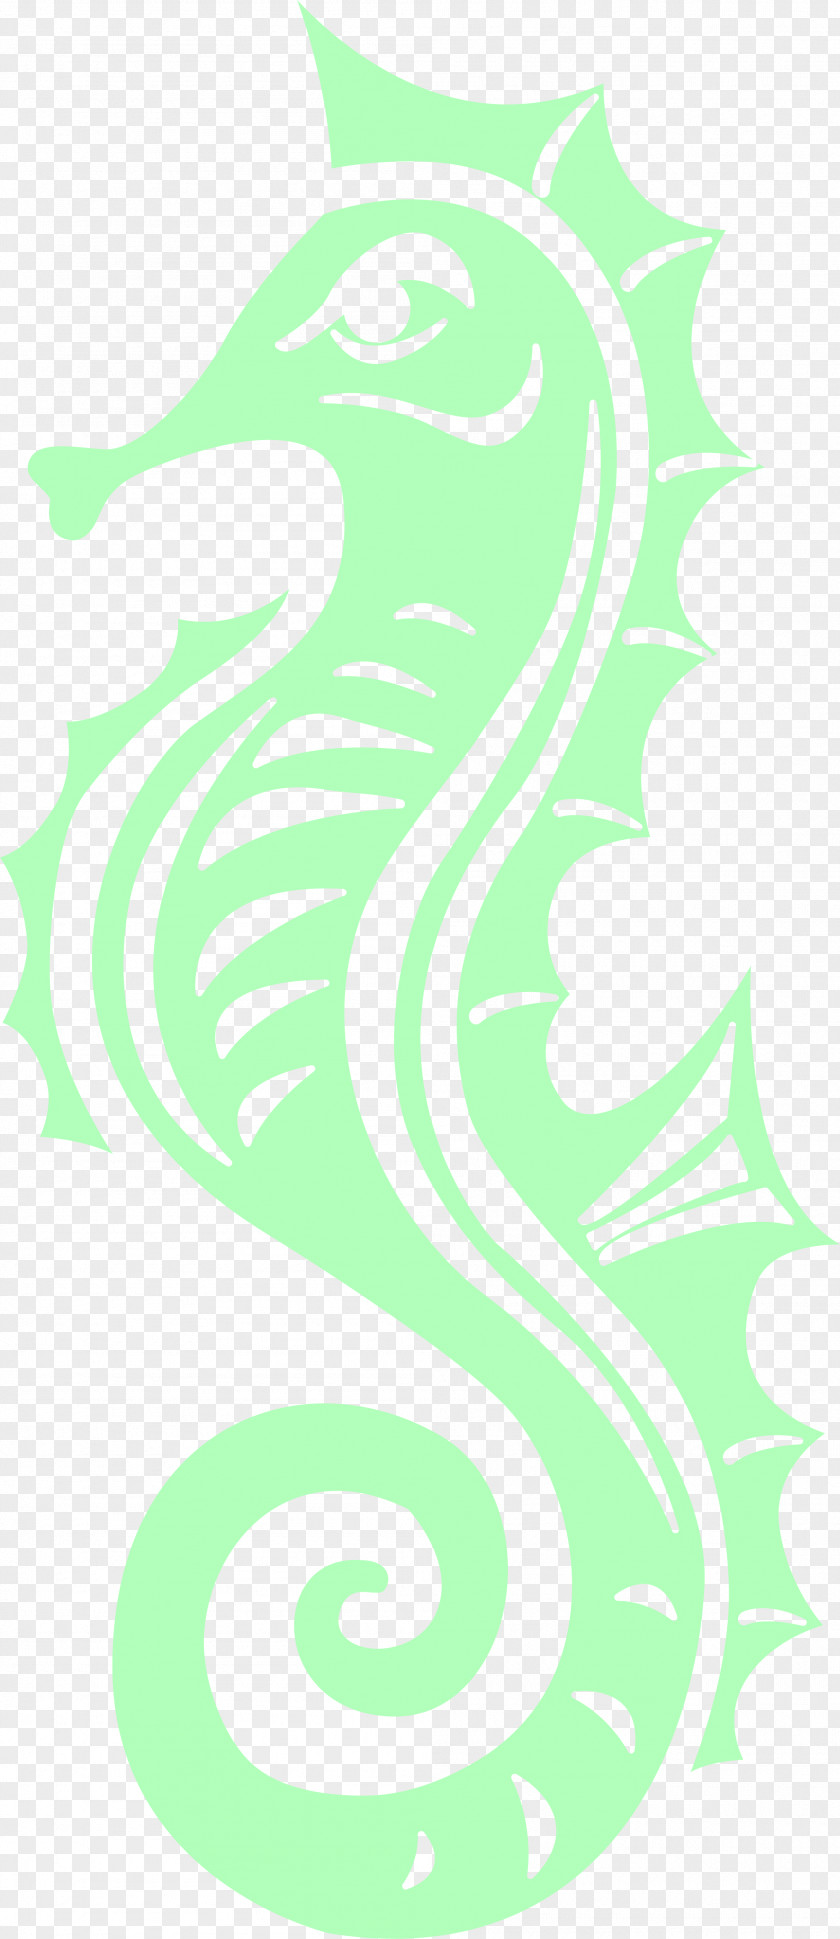 Beautiful Green Seahorse Graphic Design Illustration PNG